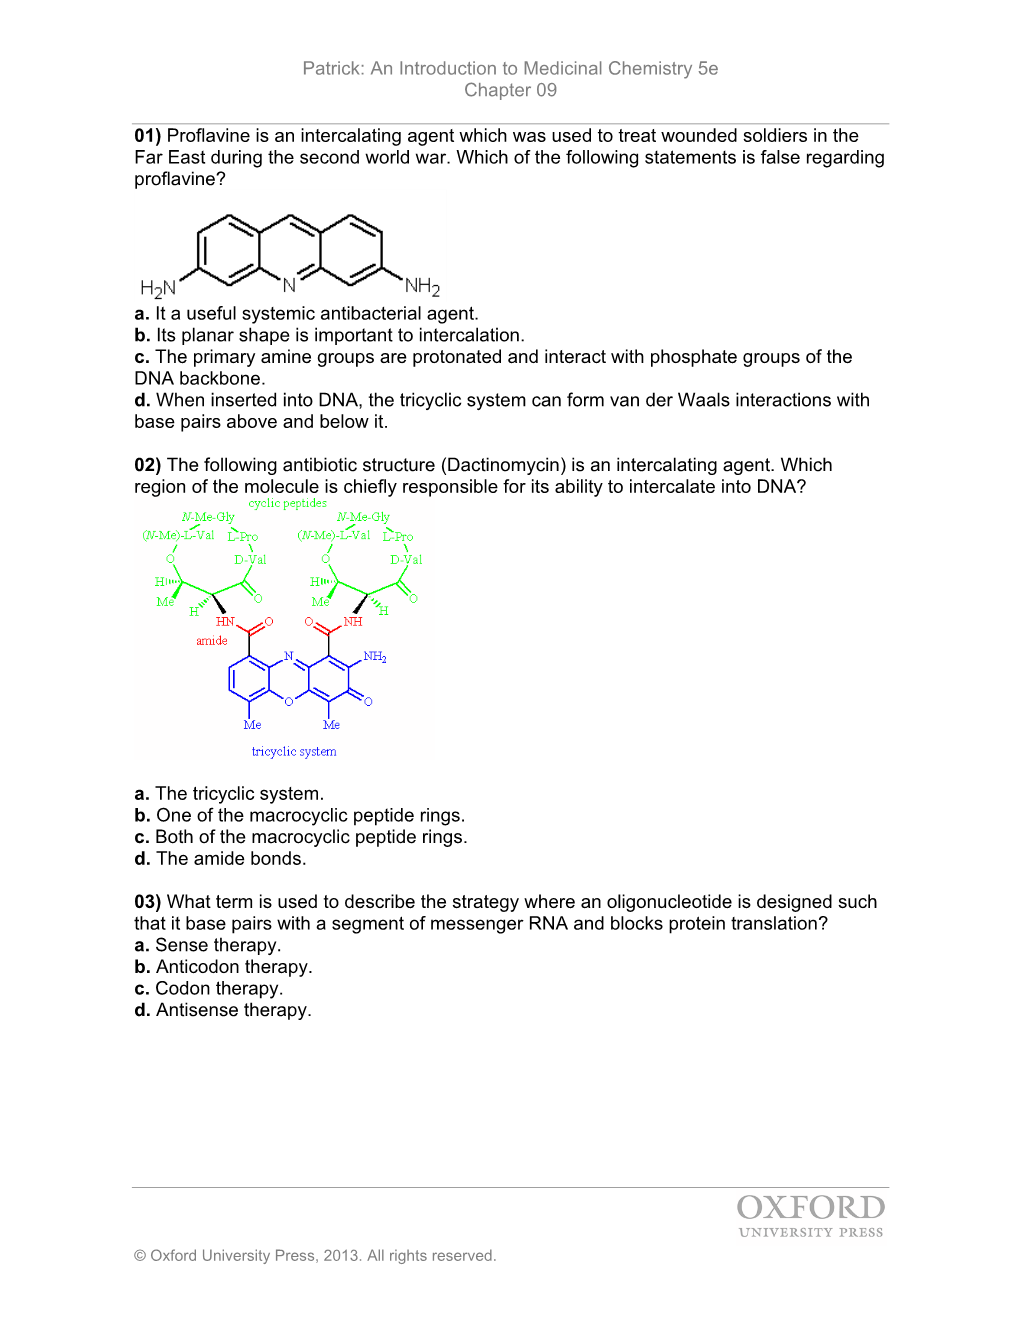 Patrick: an Introduction to Medicinal Chemistry 5E Chapter 09